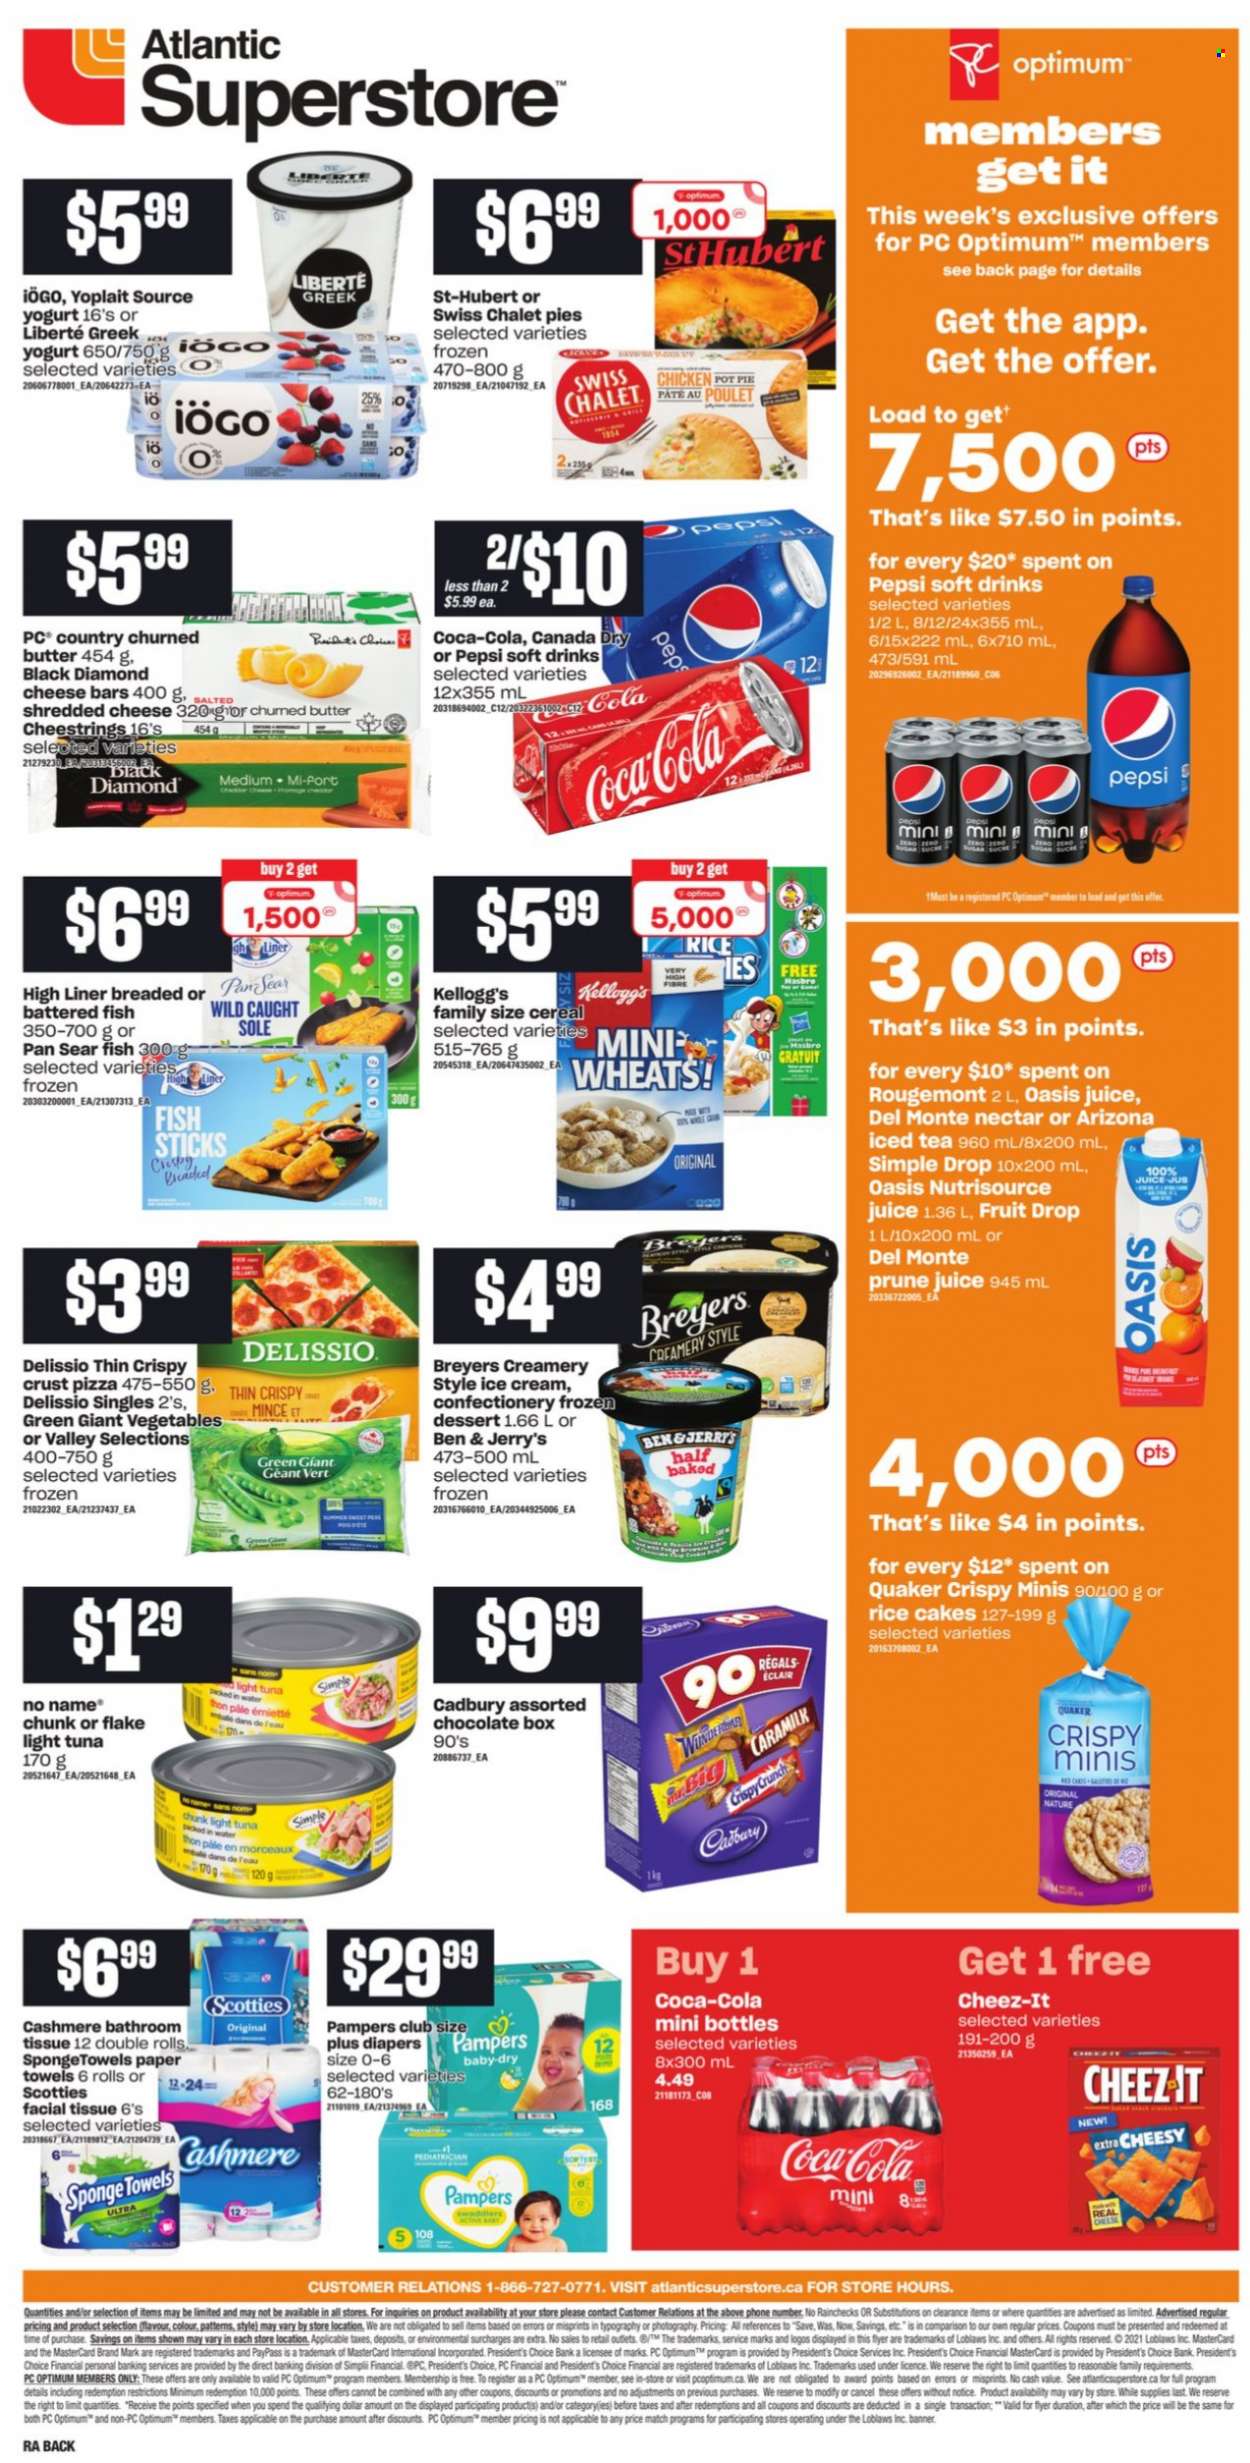 thumbnail - Atlantic Superstore Flyer - October 14, 2021 - October 20, 2021 - Sales products - pie, pot pie, tuna, fish, fish fingers, No Name, fish sticks, pizza, Quaker, shredded cheese, string cheese, Président, yoghurt, Yoplait, butter, ice cream, Ben & Jerry's, Kellogg's, Cadbury, Cheez-It, light tuna, cereals, Canada Dry, Coca-Cola, Pepsi, juice, ice tea, soft drink, AriZona, nappies, bath tissue, kitchen towels, paper towels, Optimum, NutriSource, pot, Pampers. Page 2.